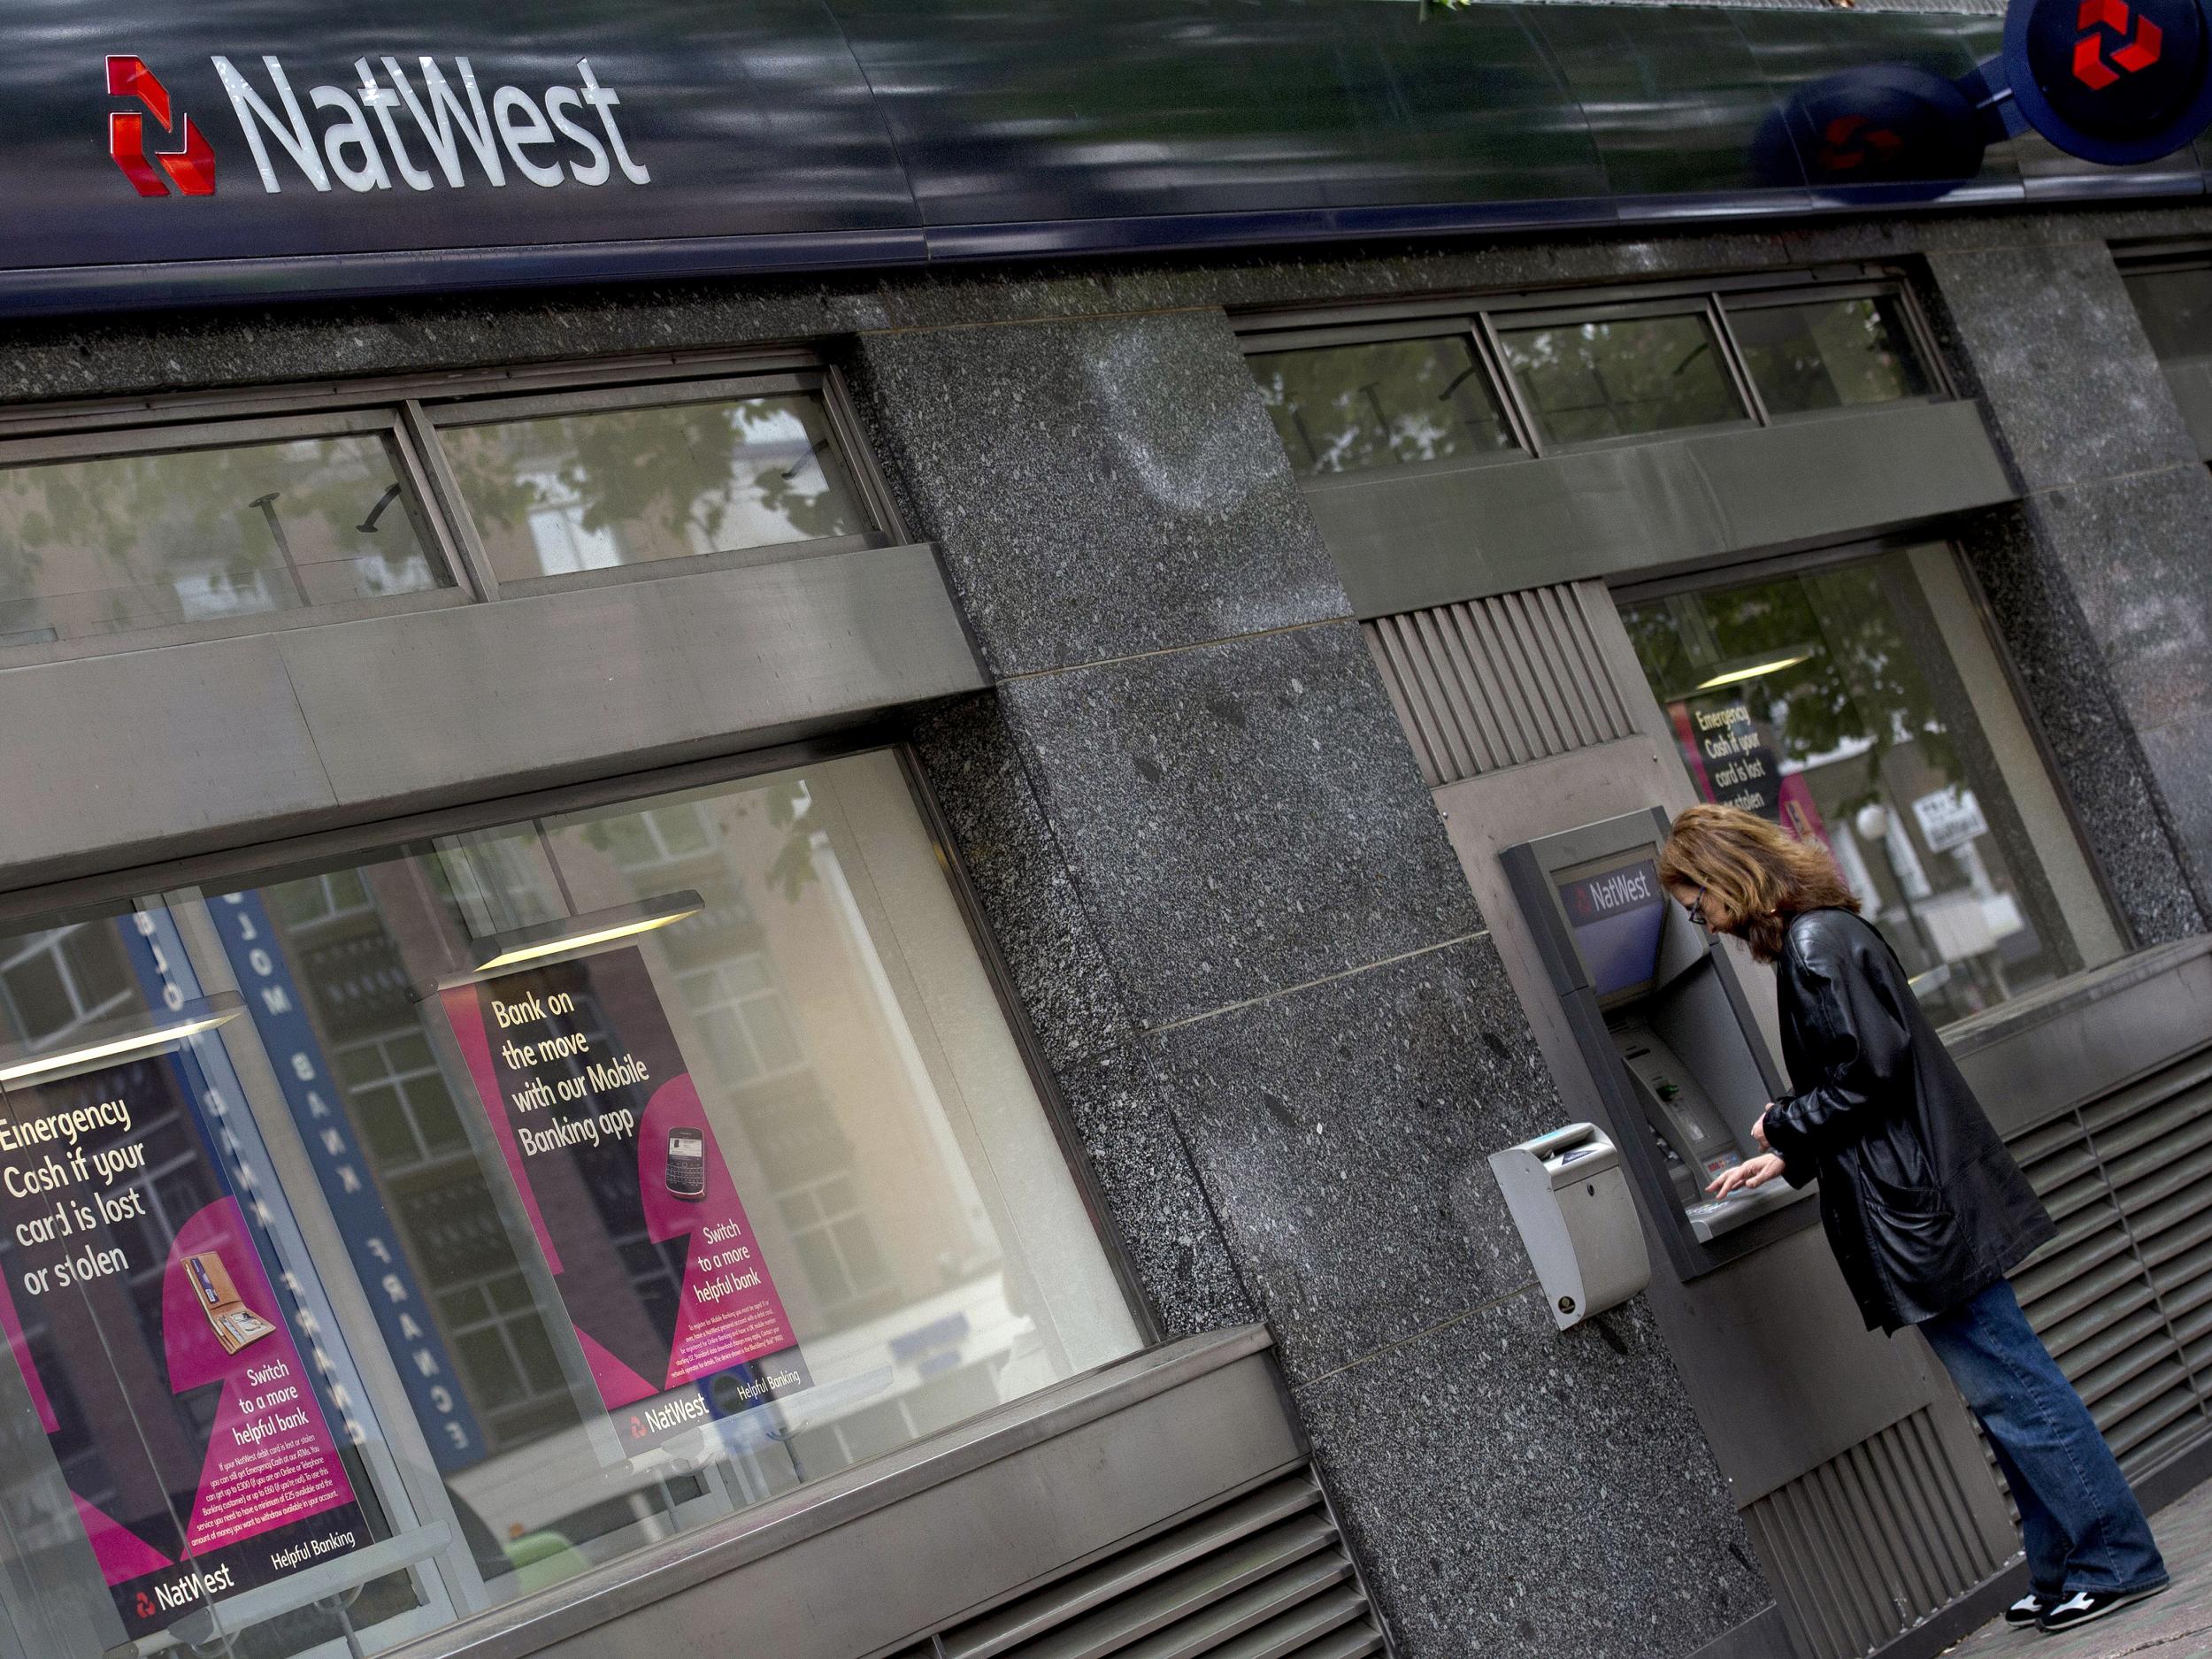 NatWest ‘sympathised’ with the fraud victims, but were unable to reverse the transaction (AF